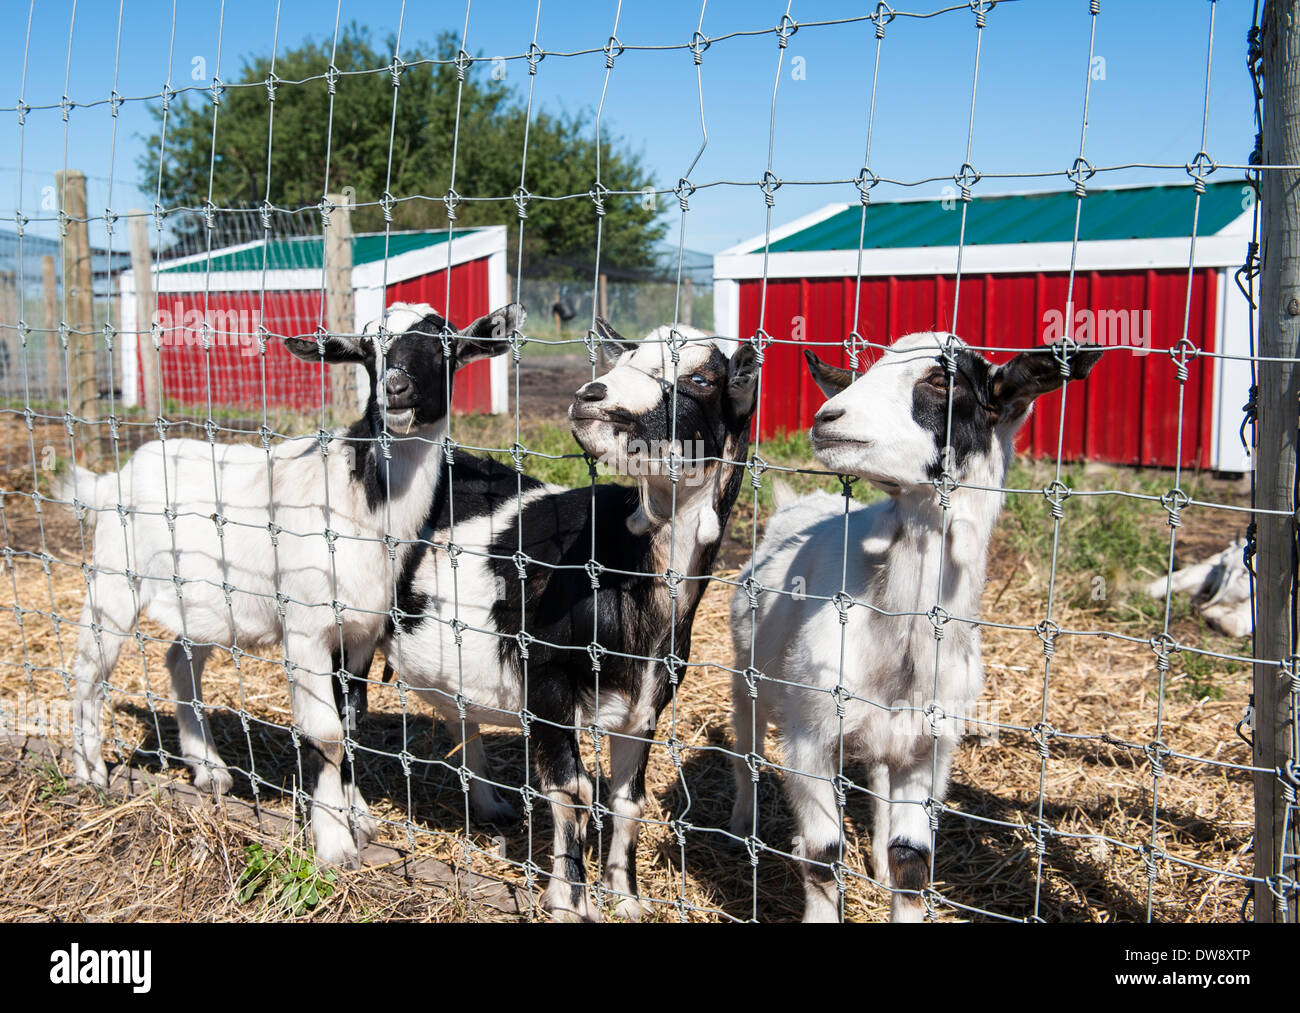 Three goats standing together at the fence in a farmyard with red barns Stock Photo